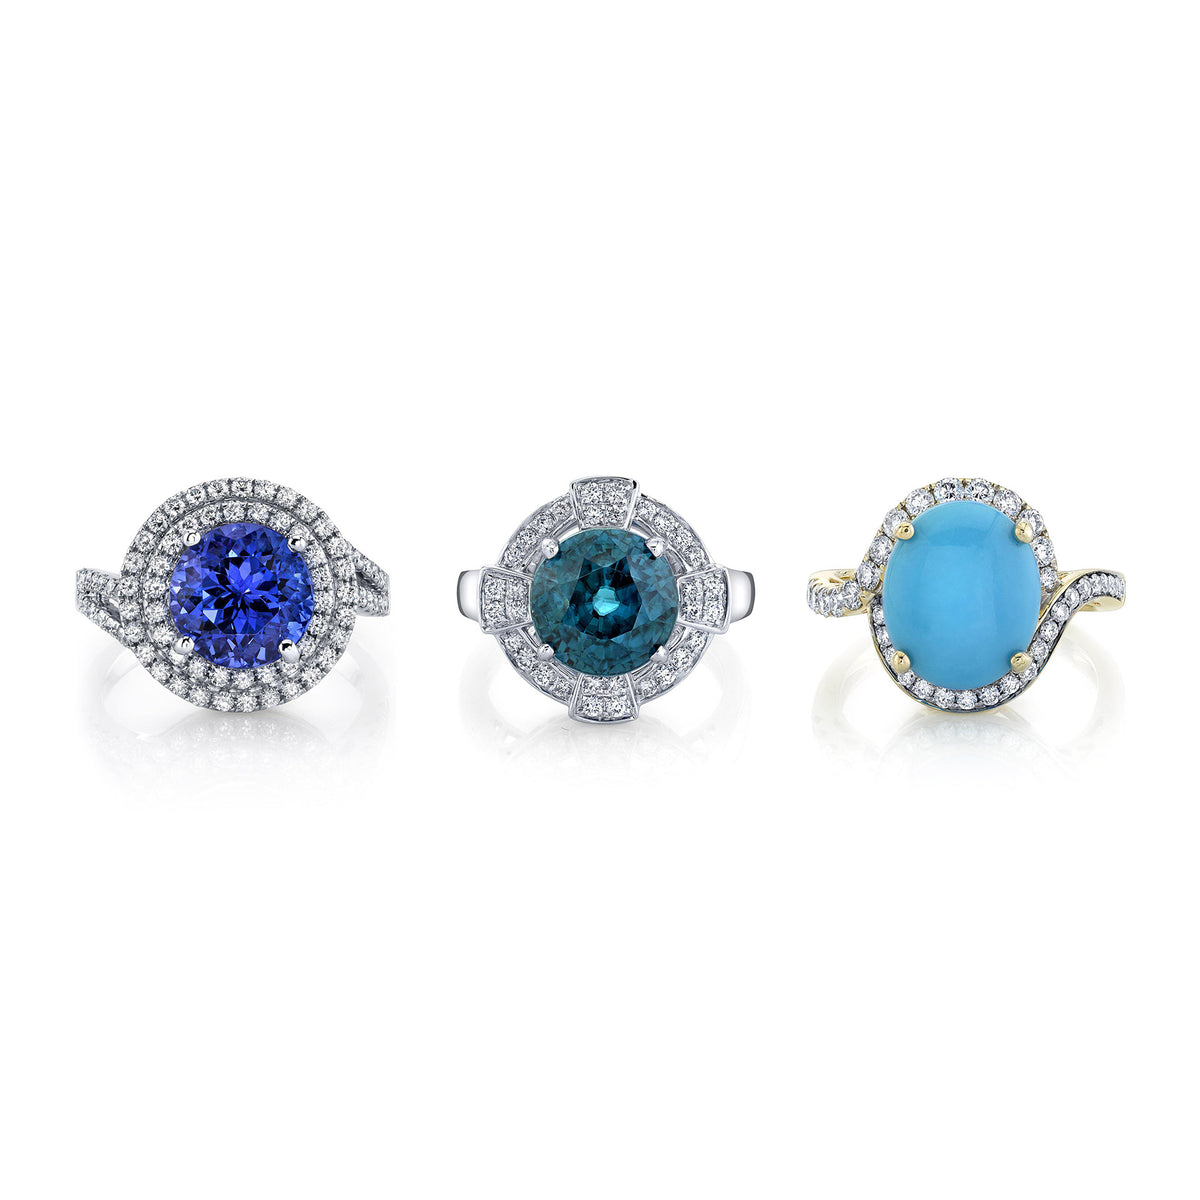 A Guide to the Three December Birthstones - What to Know – TVON